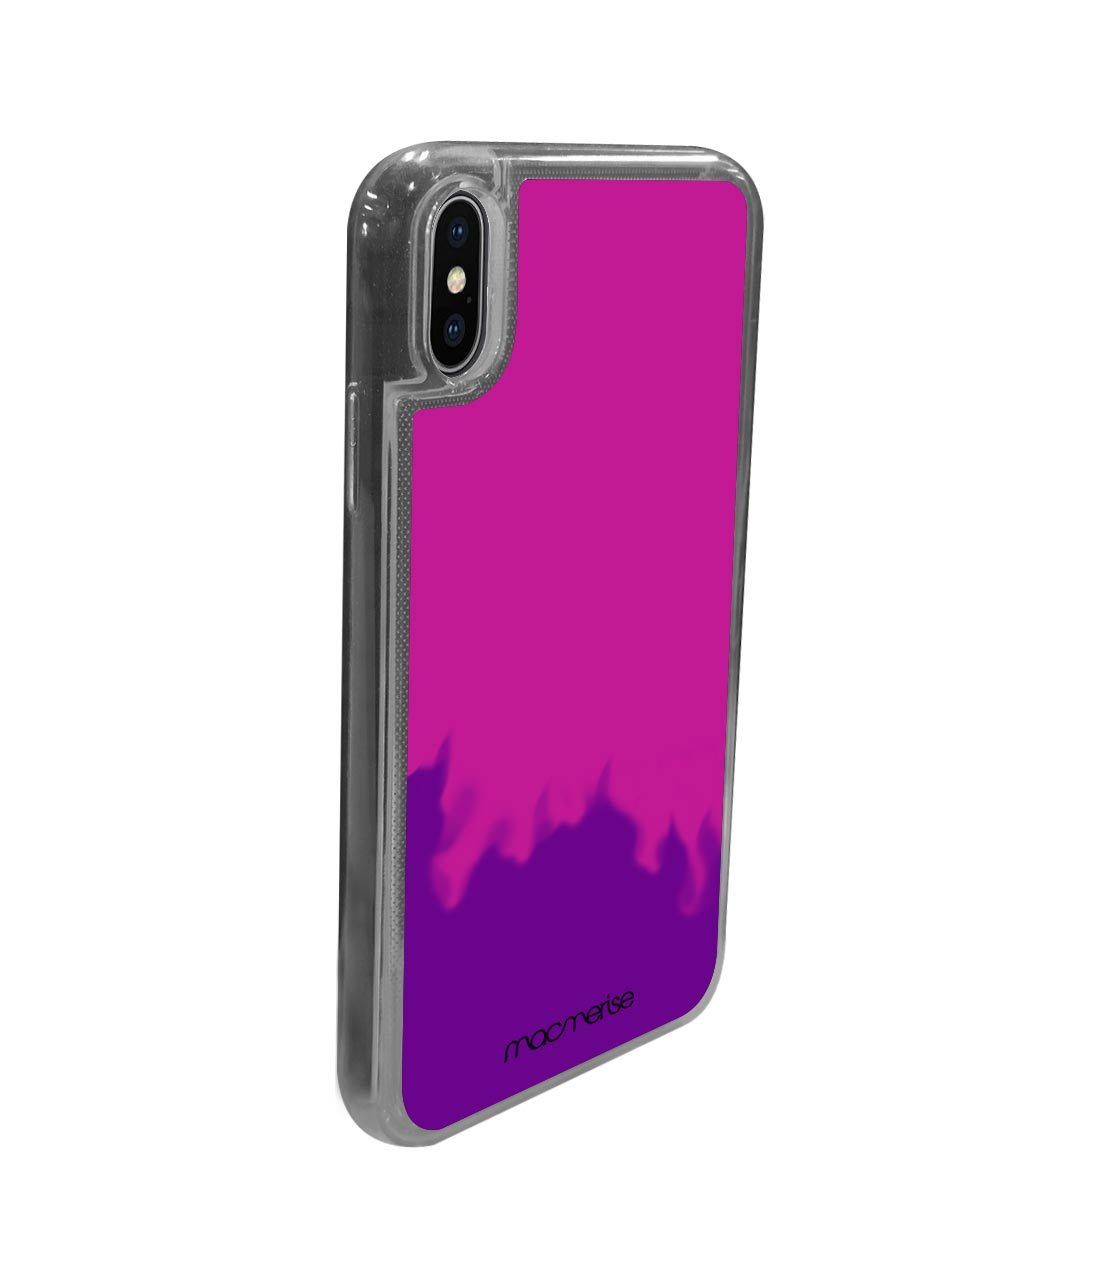 Neon Sand Purple Pink - Neon Sand Phone Case for iPhone X